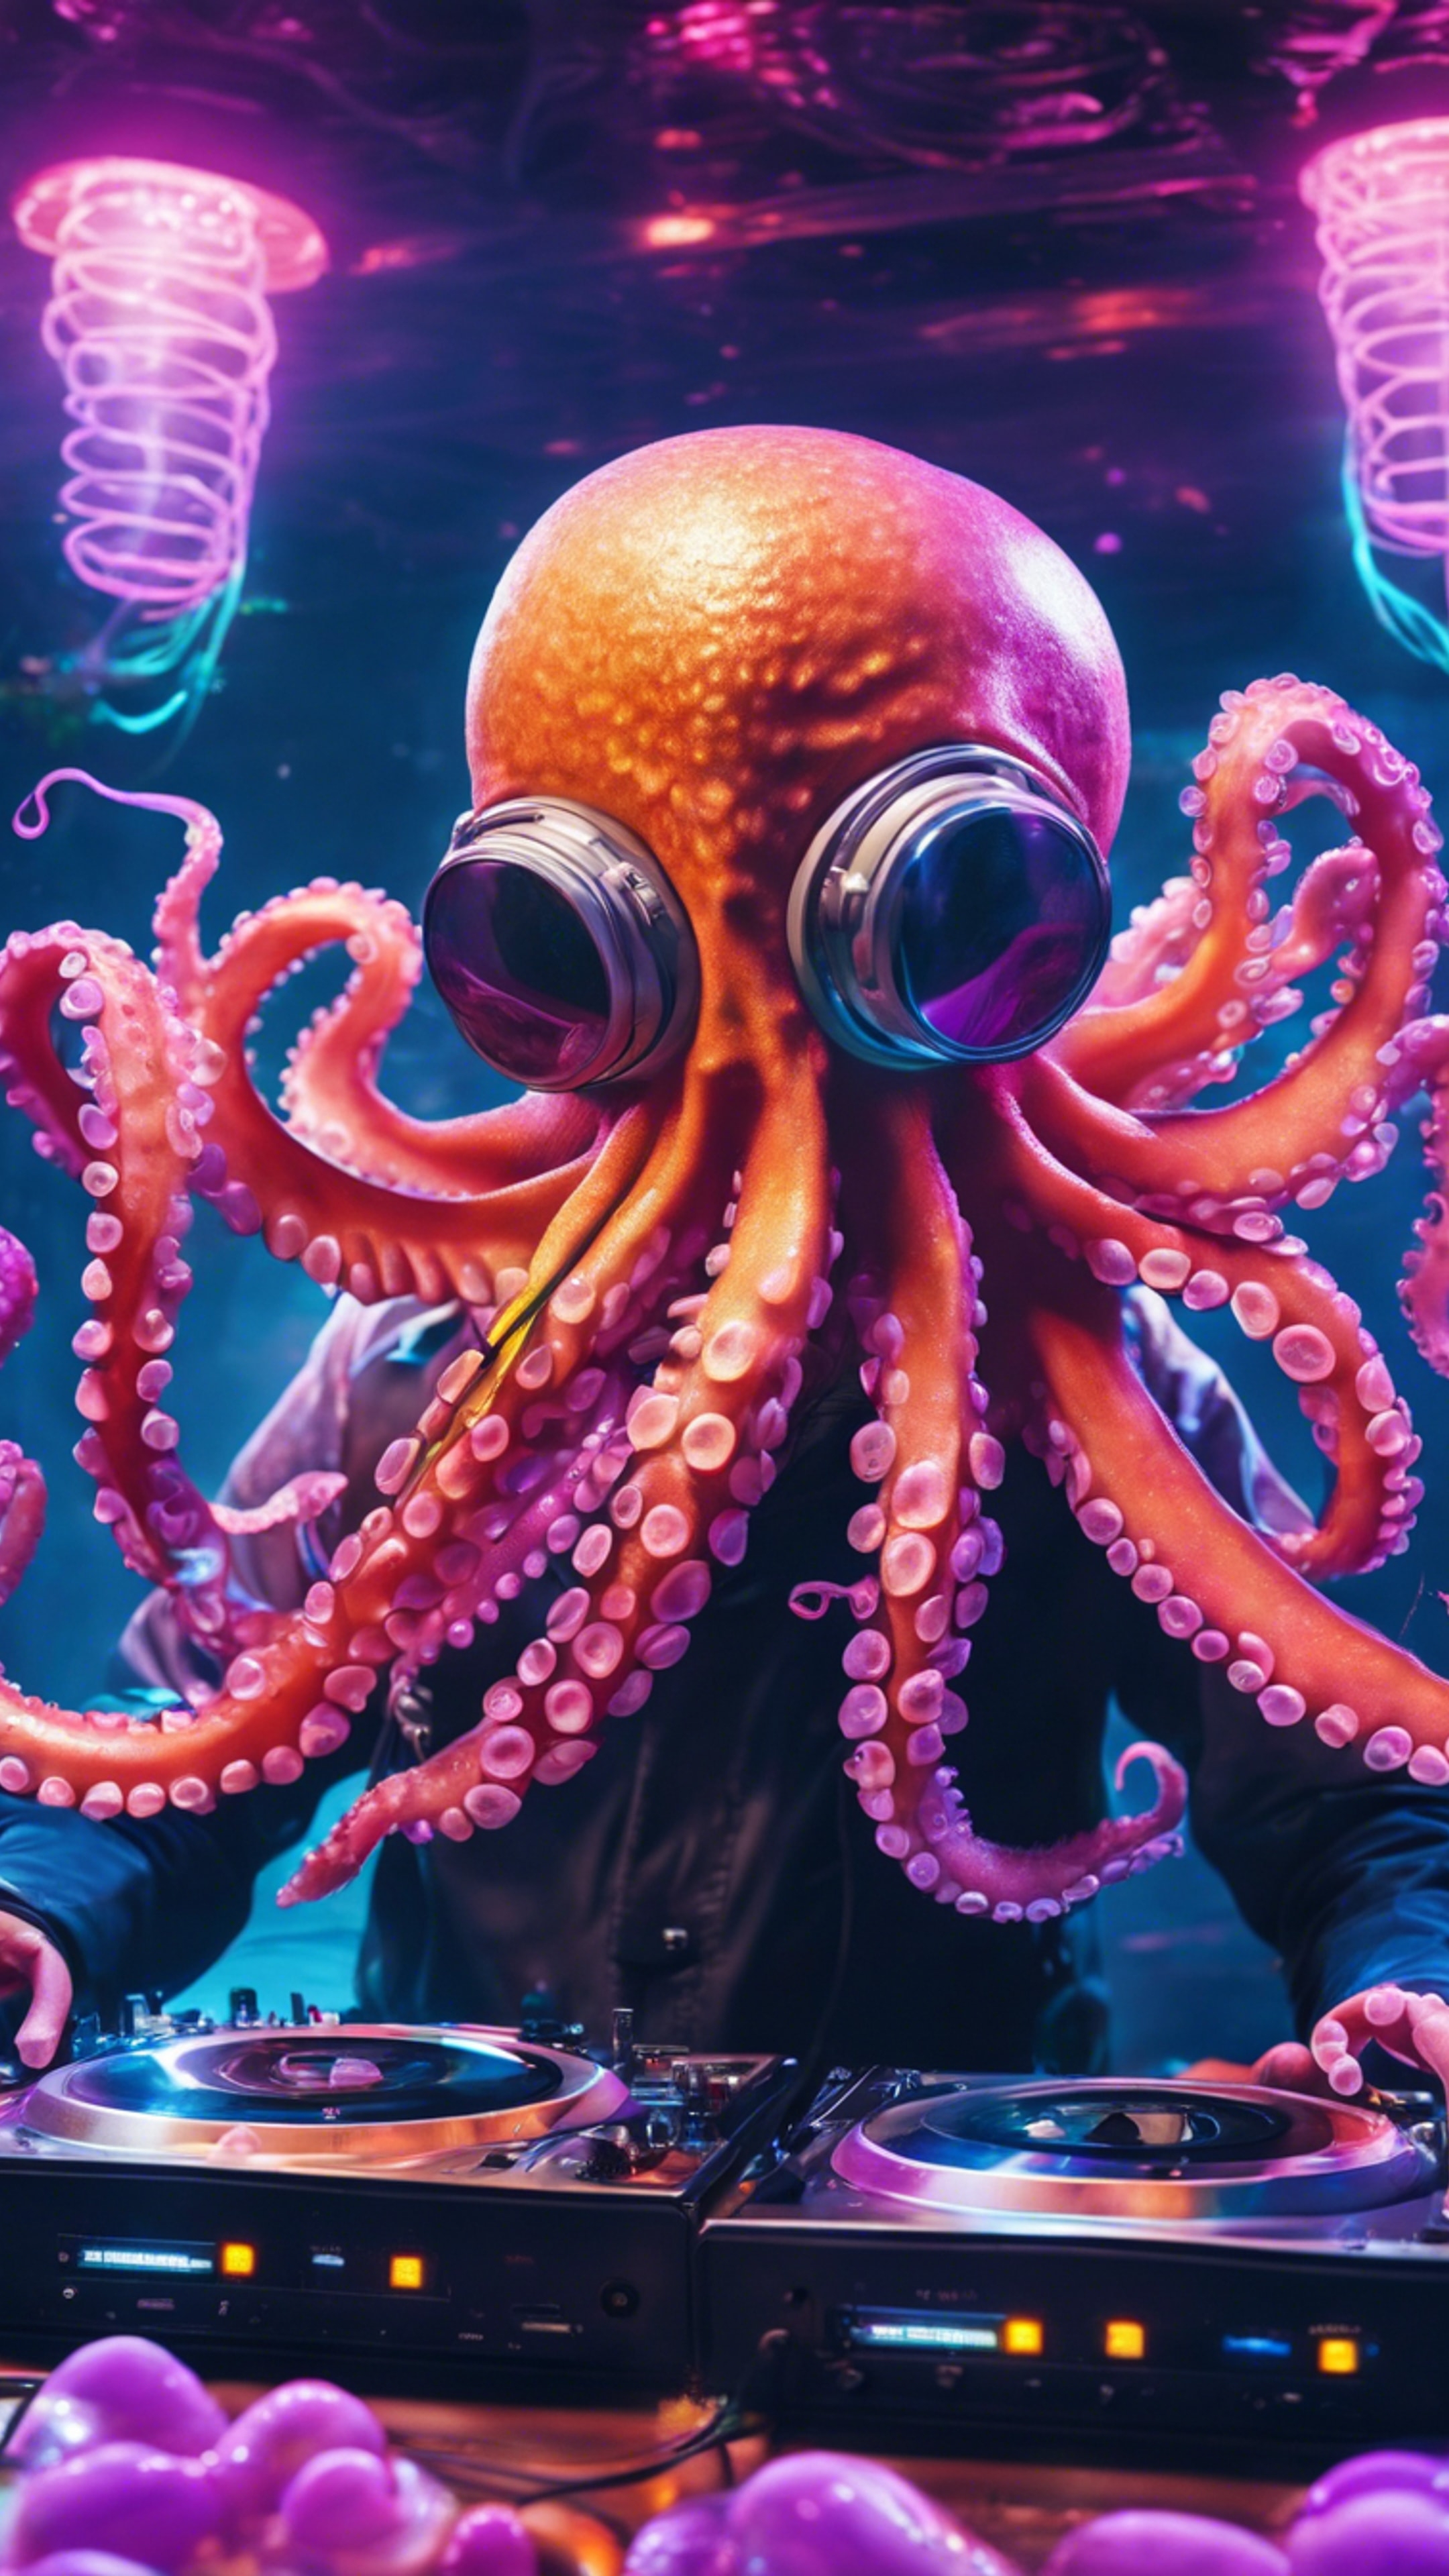 An octopus DJ controlling the music at an underwater rave amidst neon jellyfish. 벽지[8d0f478d59094f5192d2]